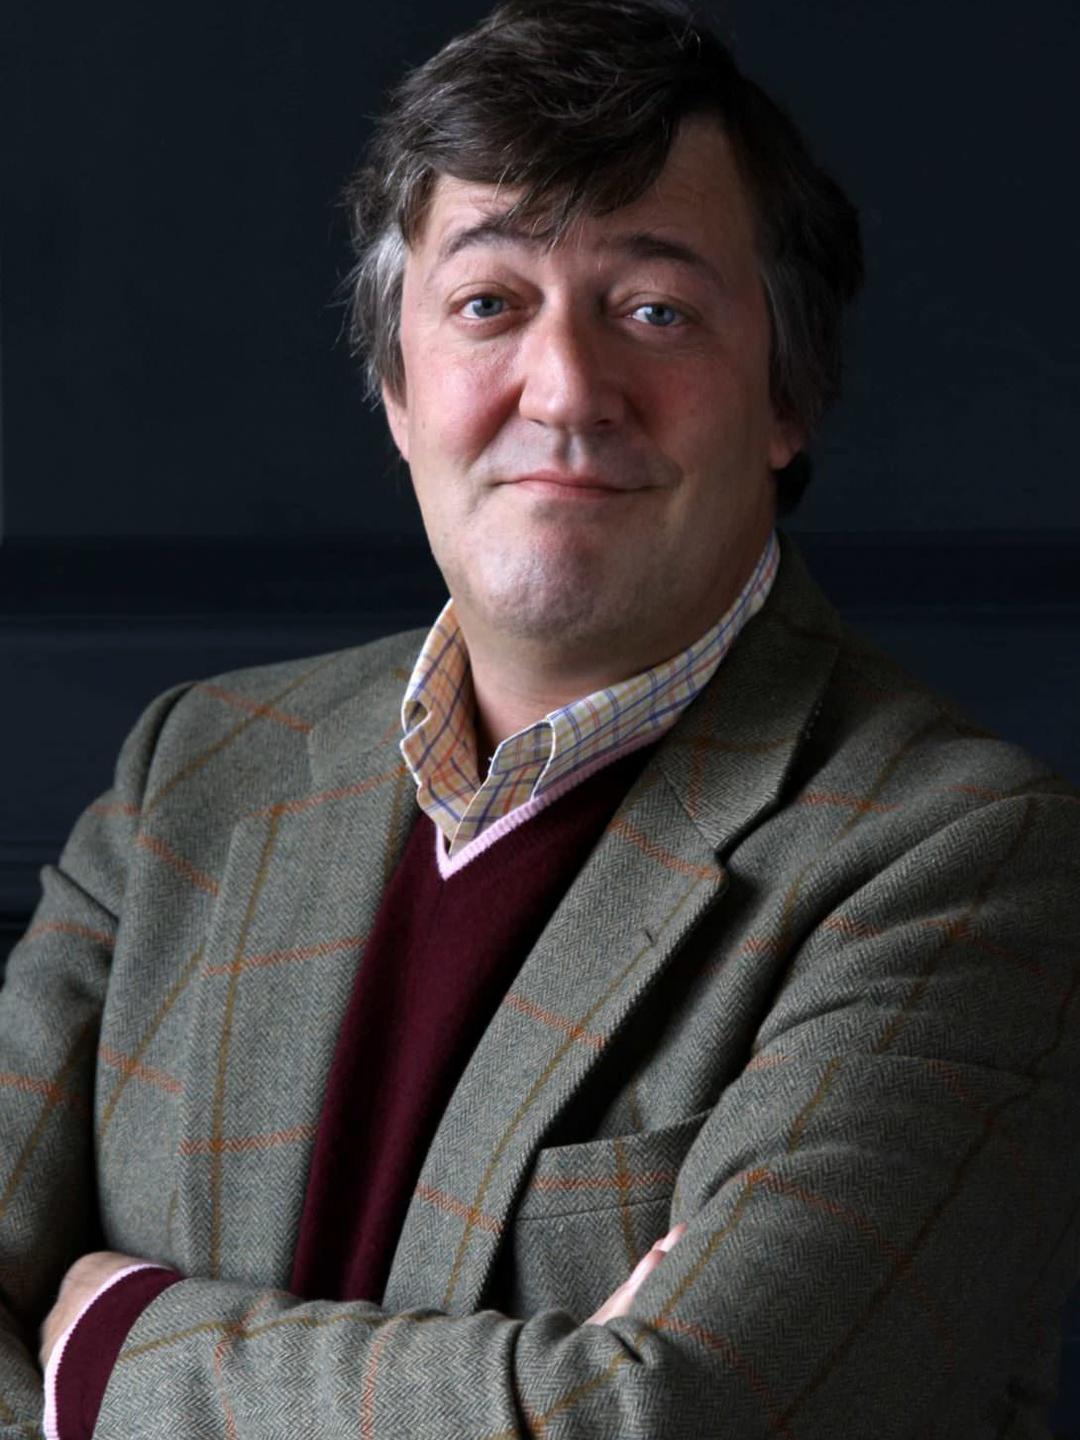 Stephen Fry story of success